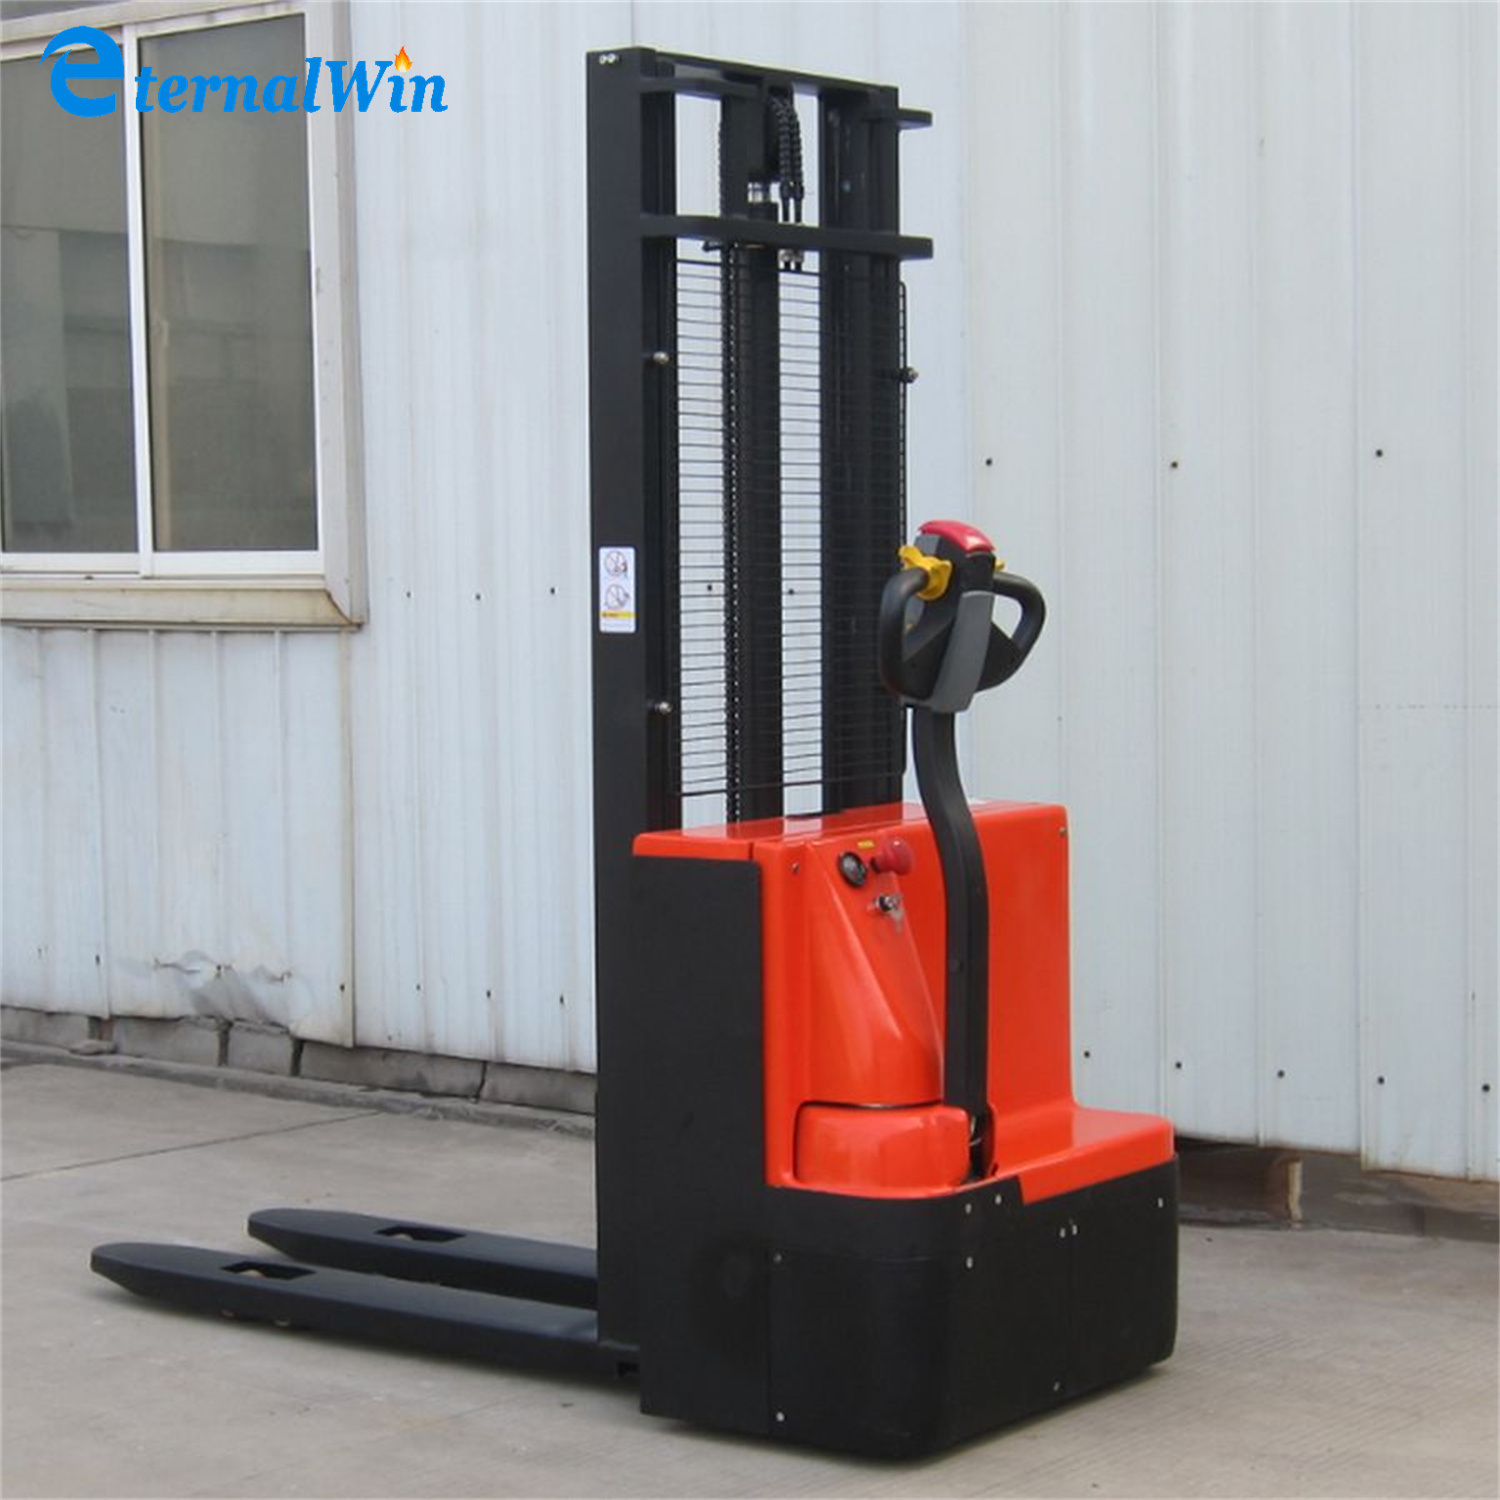 Hot Selling Hydraulic Pallet Stacker Electric Powered Pallet Stacker 1ton 1.5ton 1.6m, 2.5m, 3m,4.5m Electric Stacker Pallet Truck Price/ Full Electric Forklift